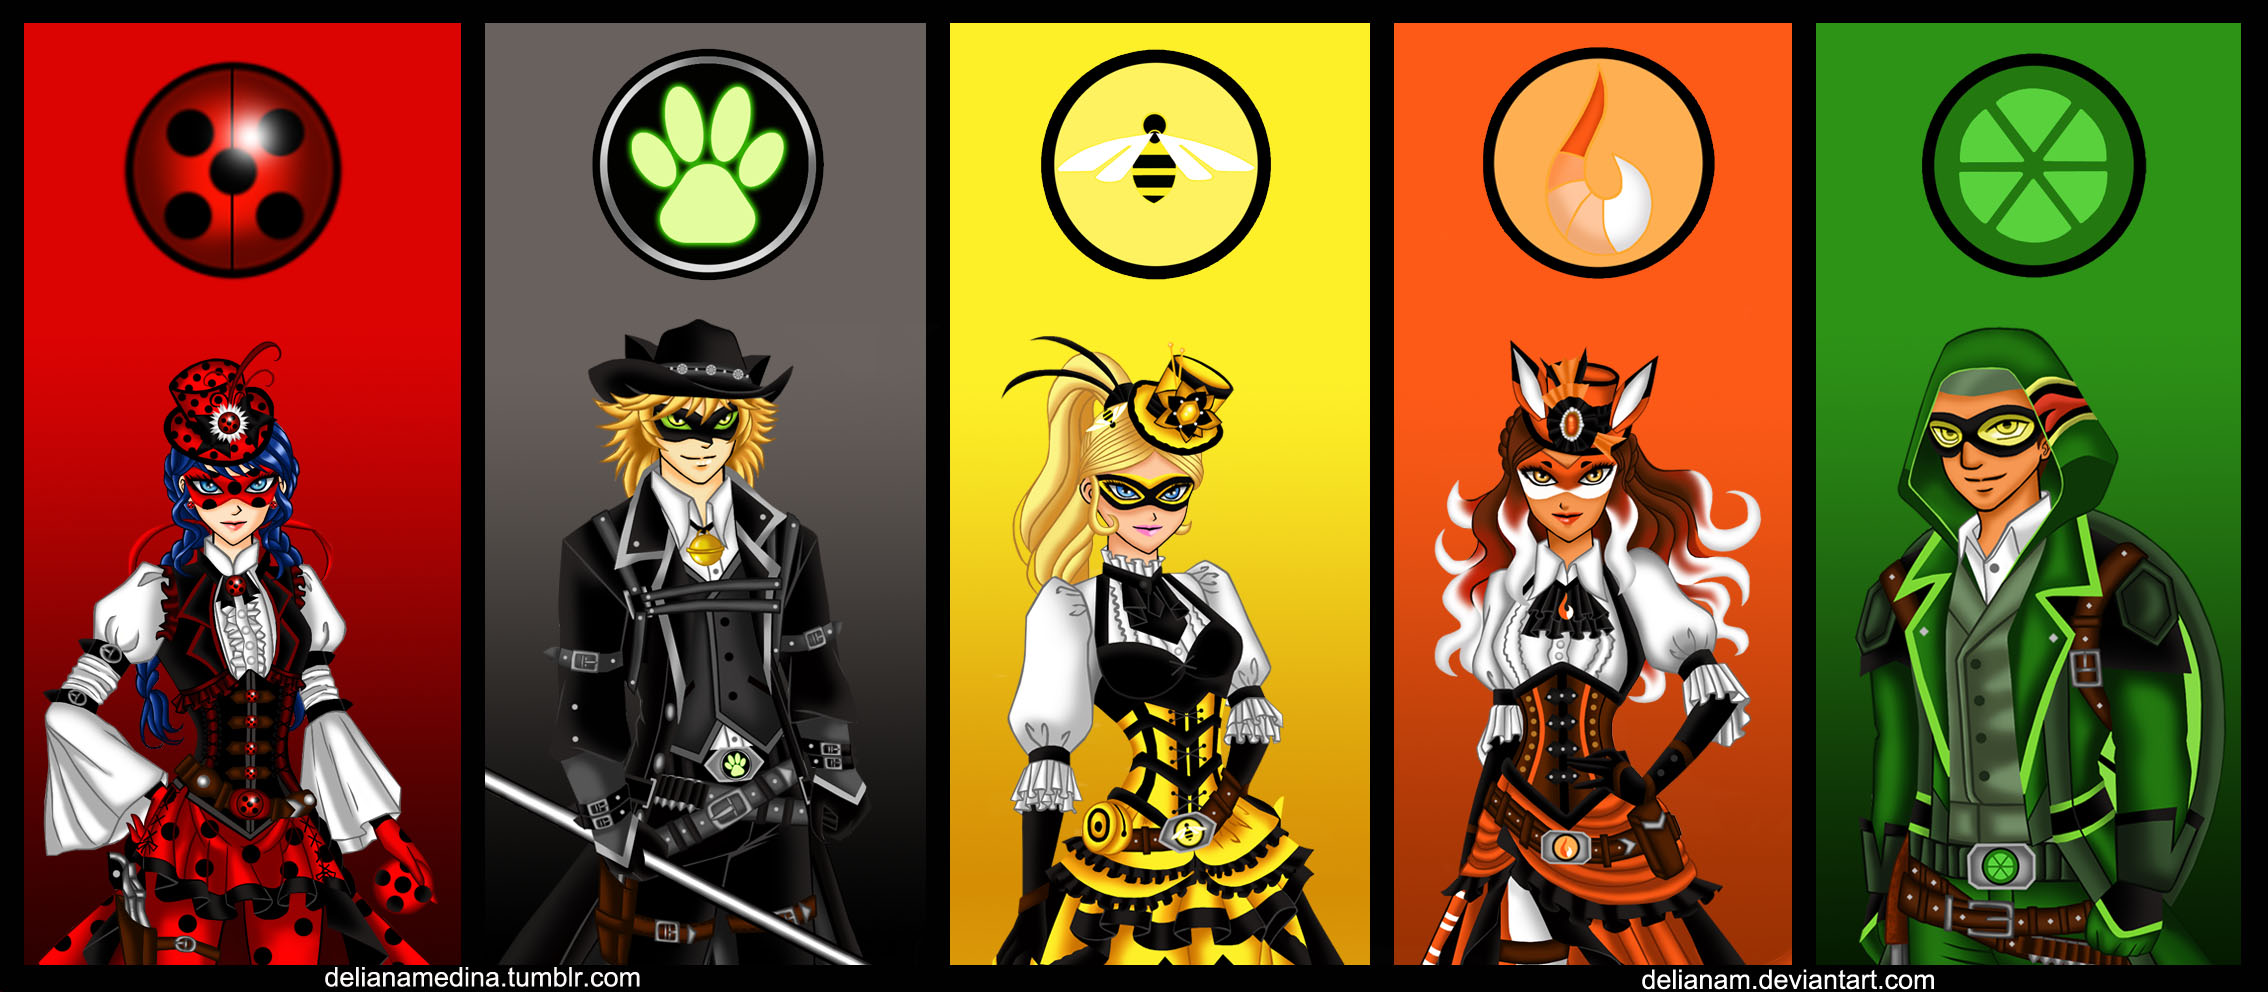 Miraculous - Ladybug and Cat Noir Redesign by pokemonmalcolregion